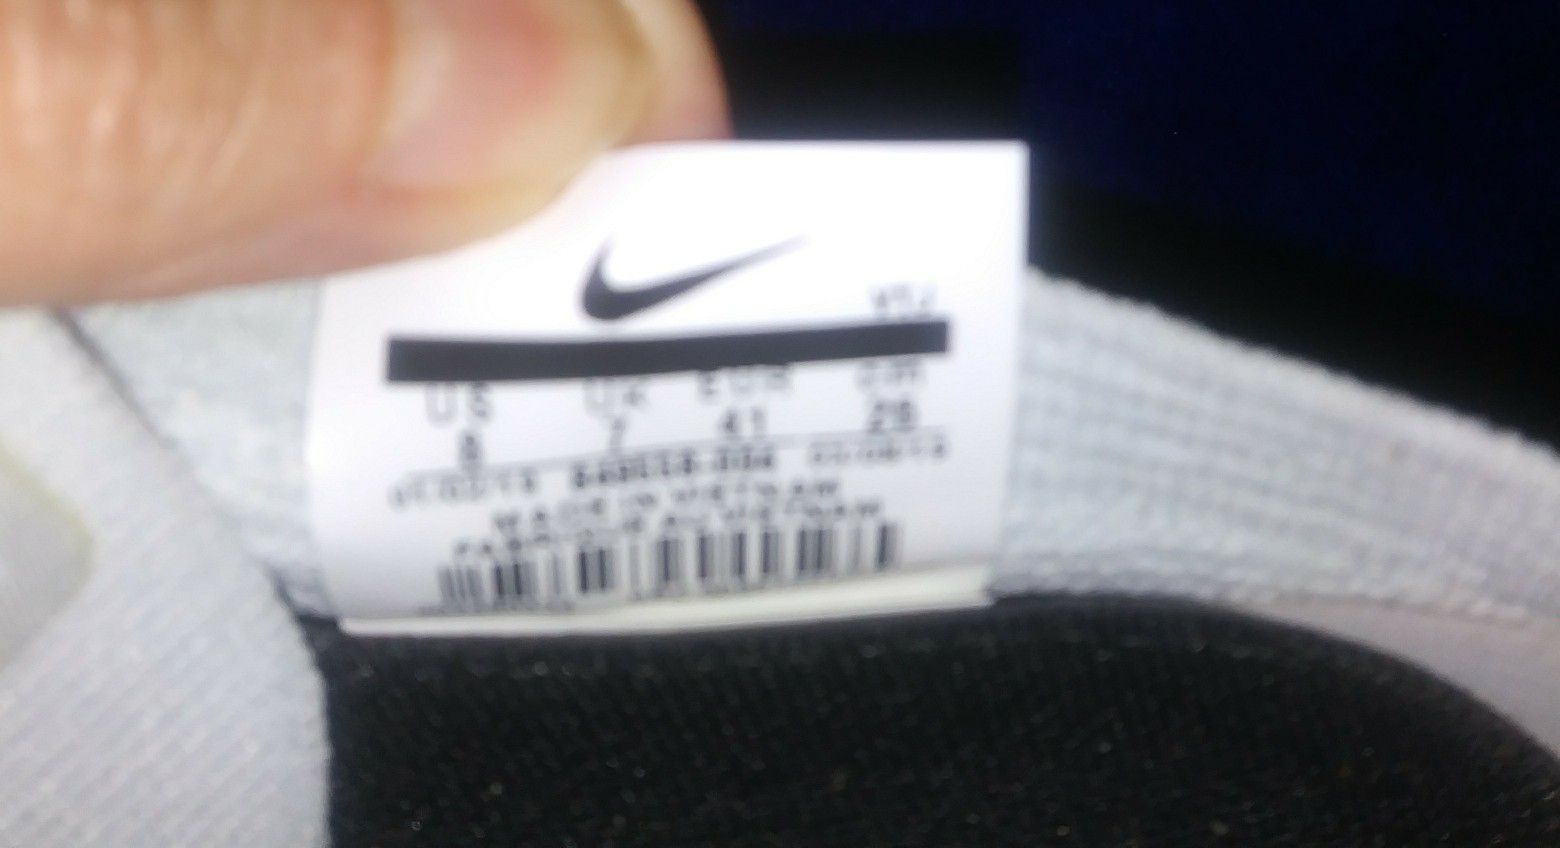 NIKE RUNNING SHOES BRAND NEW ' SIZE 8 I HAVE A BLACK PAIR I WERE VERY COMFORTABLE ITS LIKE WALKING ON AIR